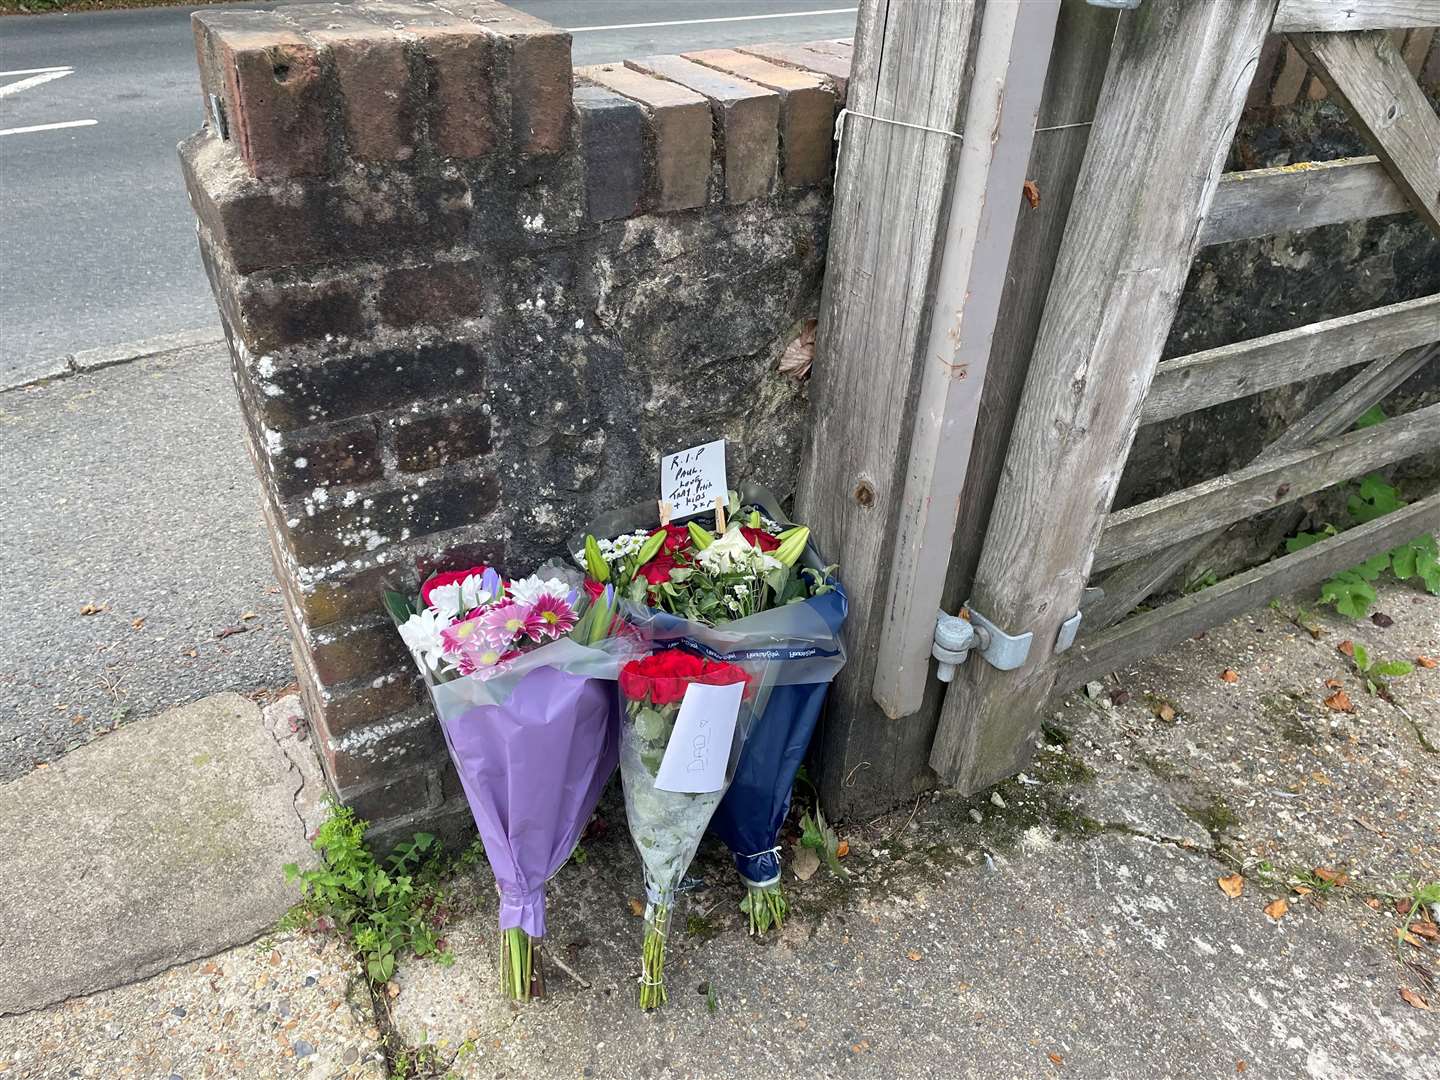 The bouquets, left at the car park in Lydden, have notes with the words ‘Paul’ and ‘Dad’, written on them